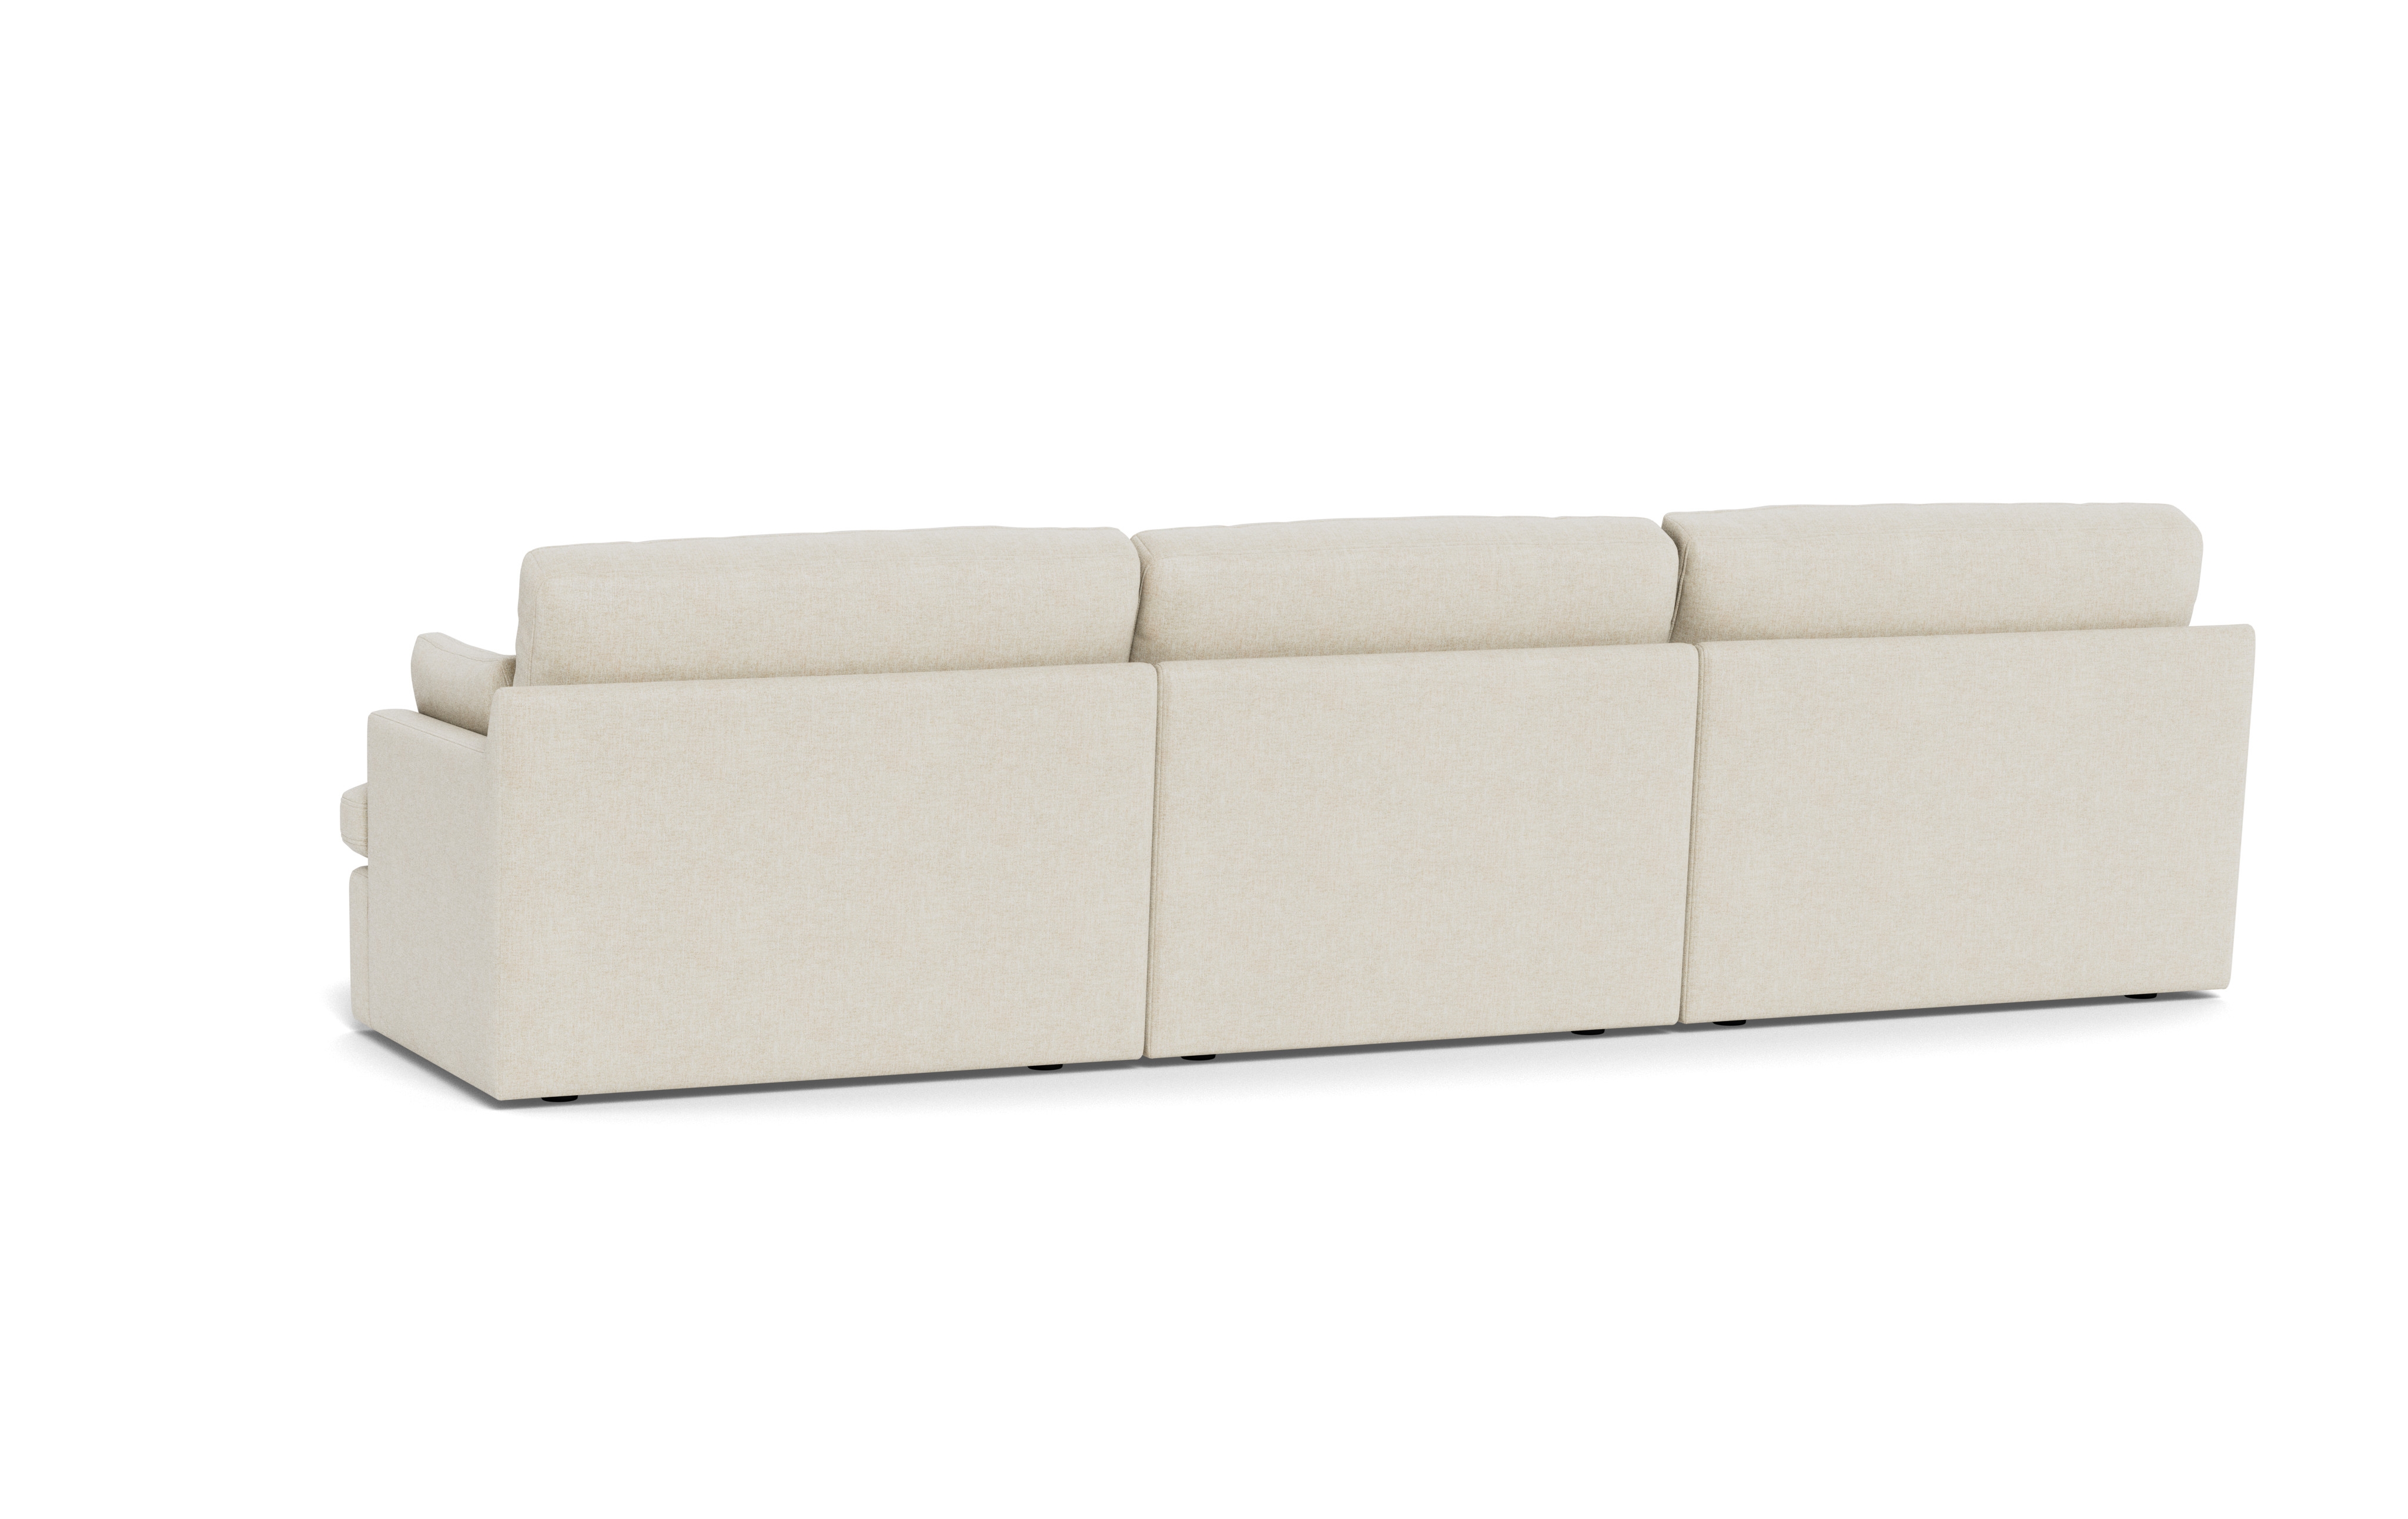 Hayes Modular 3-Seat Reversible Chaise Sectional - Image 4